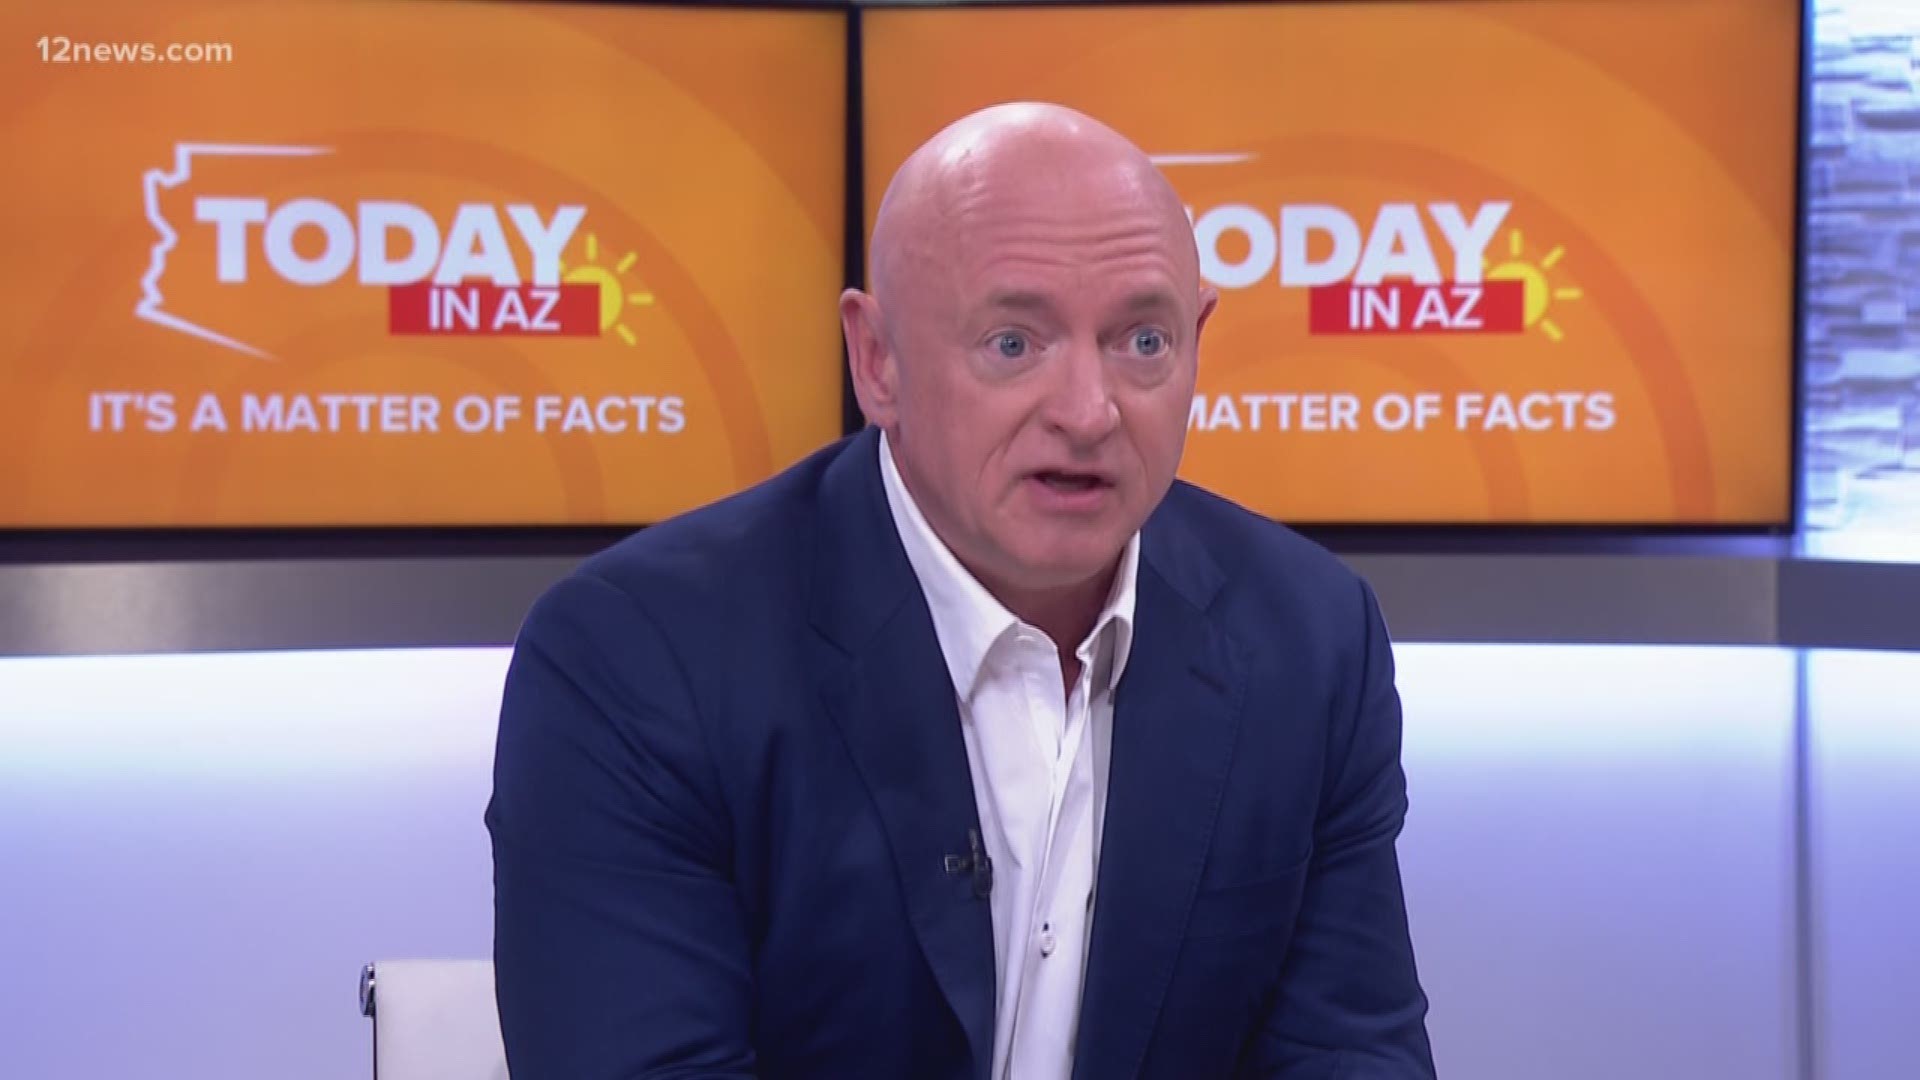 Democratic candidate Mark Kelly talked about health insurance and the concept of Medicare for all in his first live television interview since launching his Arizona Senate campaign.